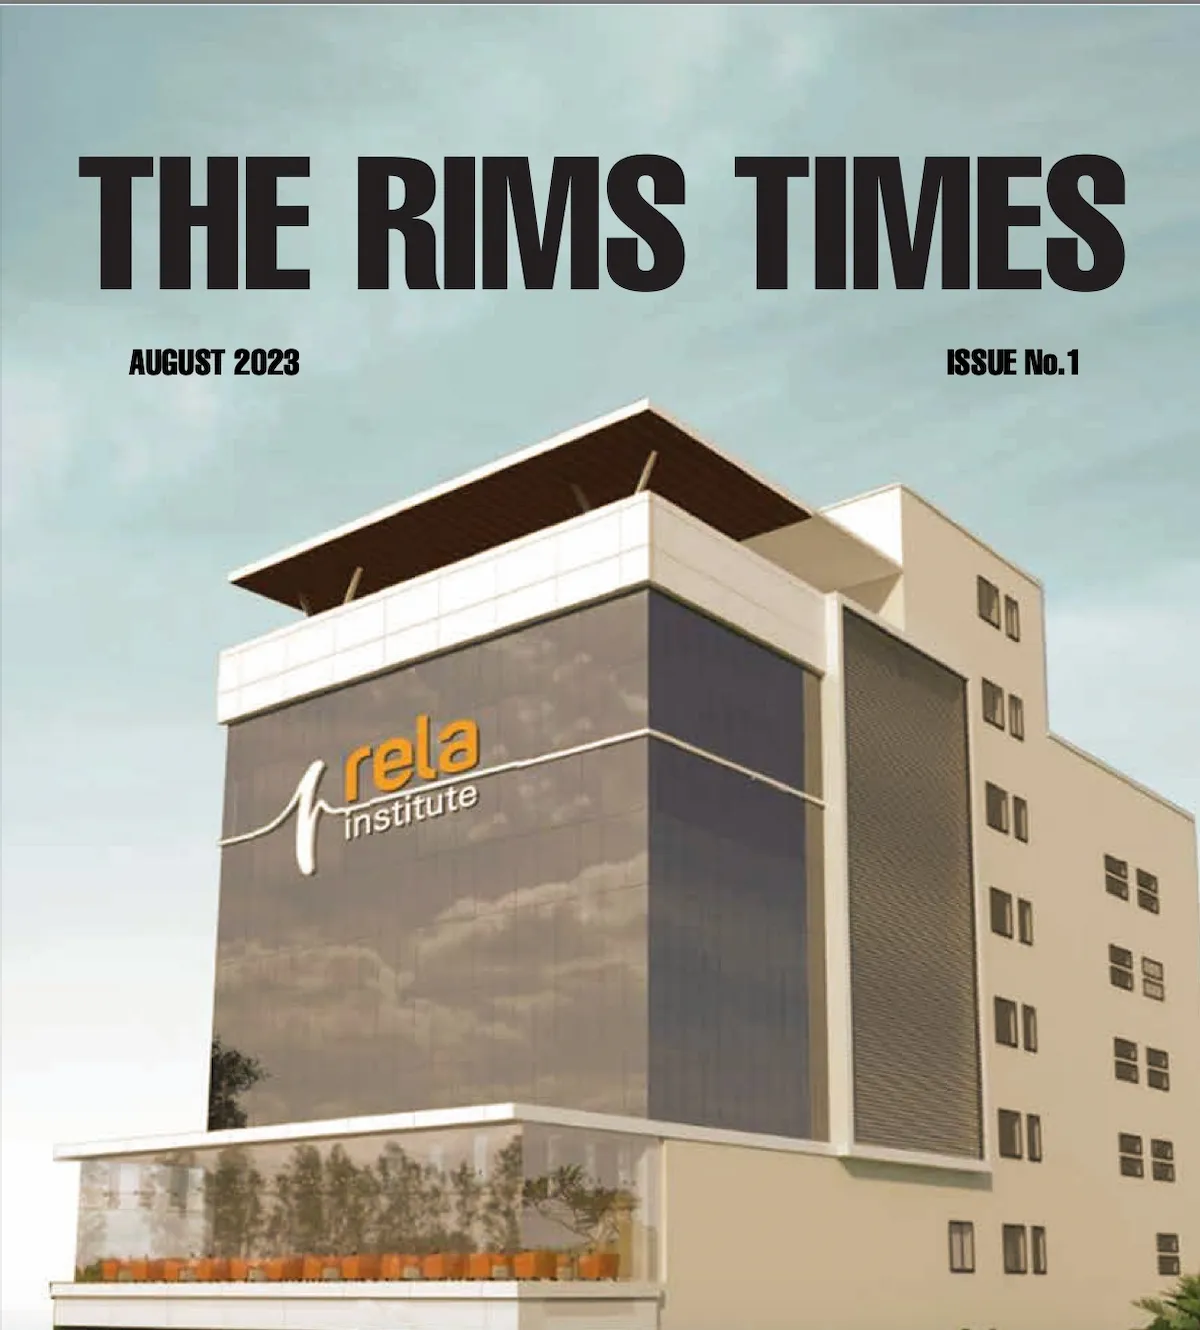 The RIMS Times August 2023